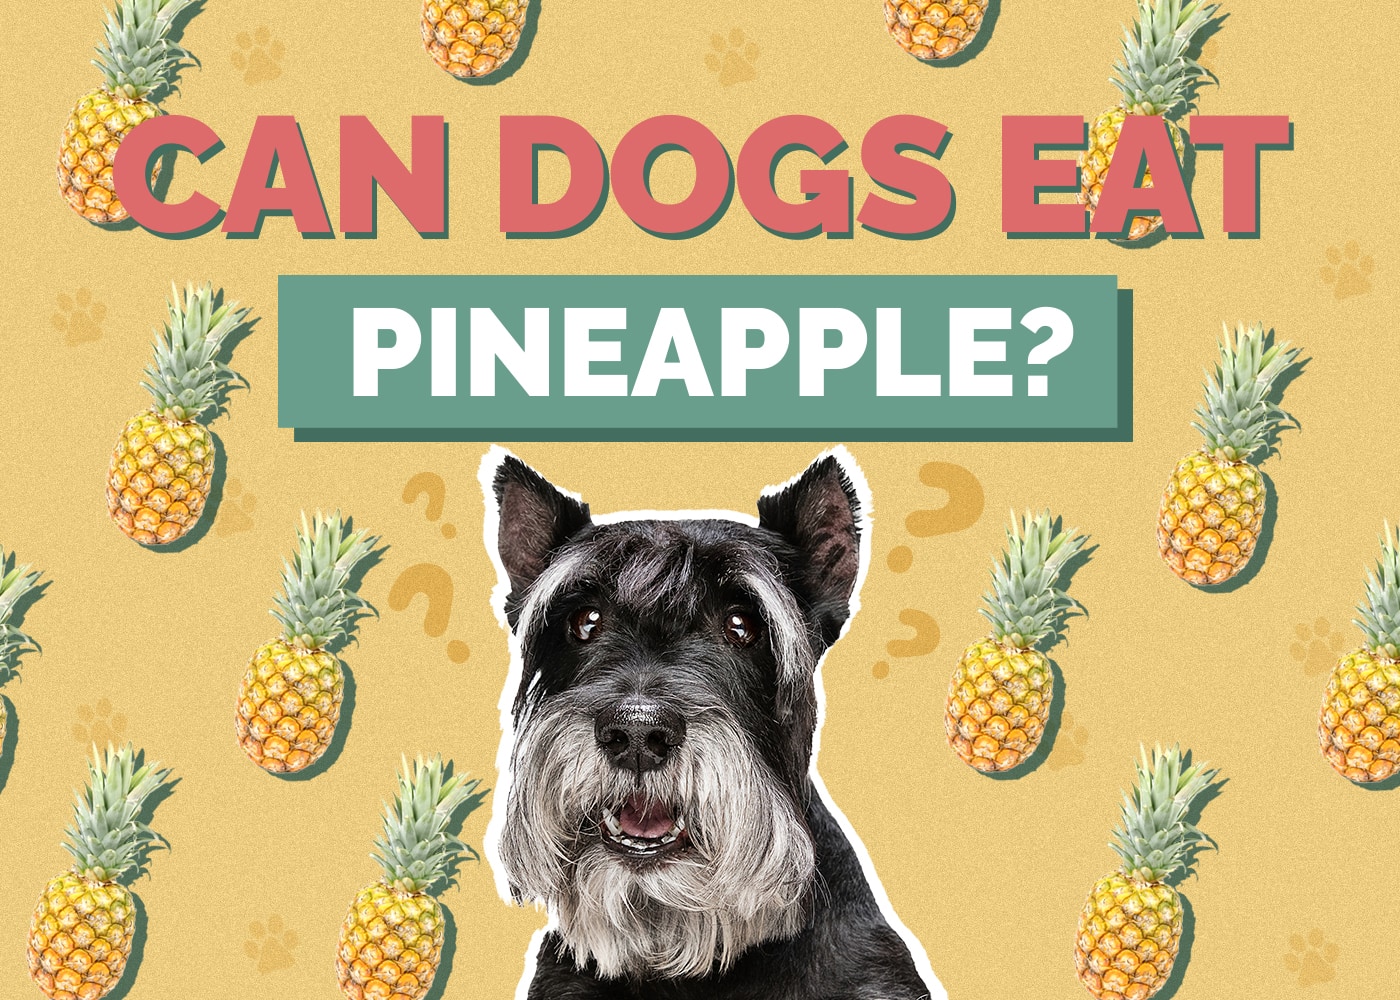 Can Dogs Eat pineapple